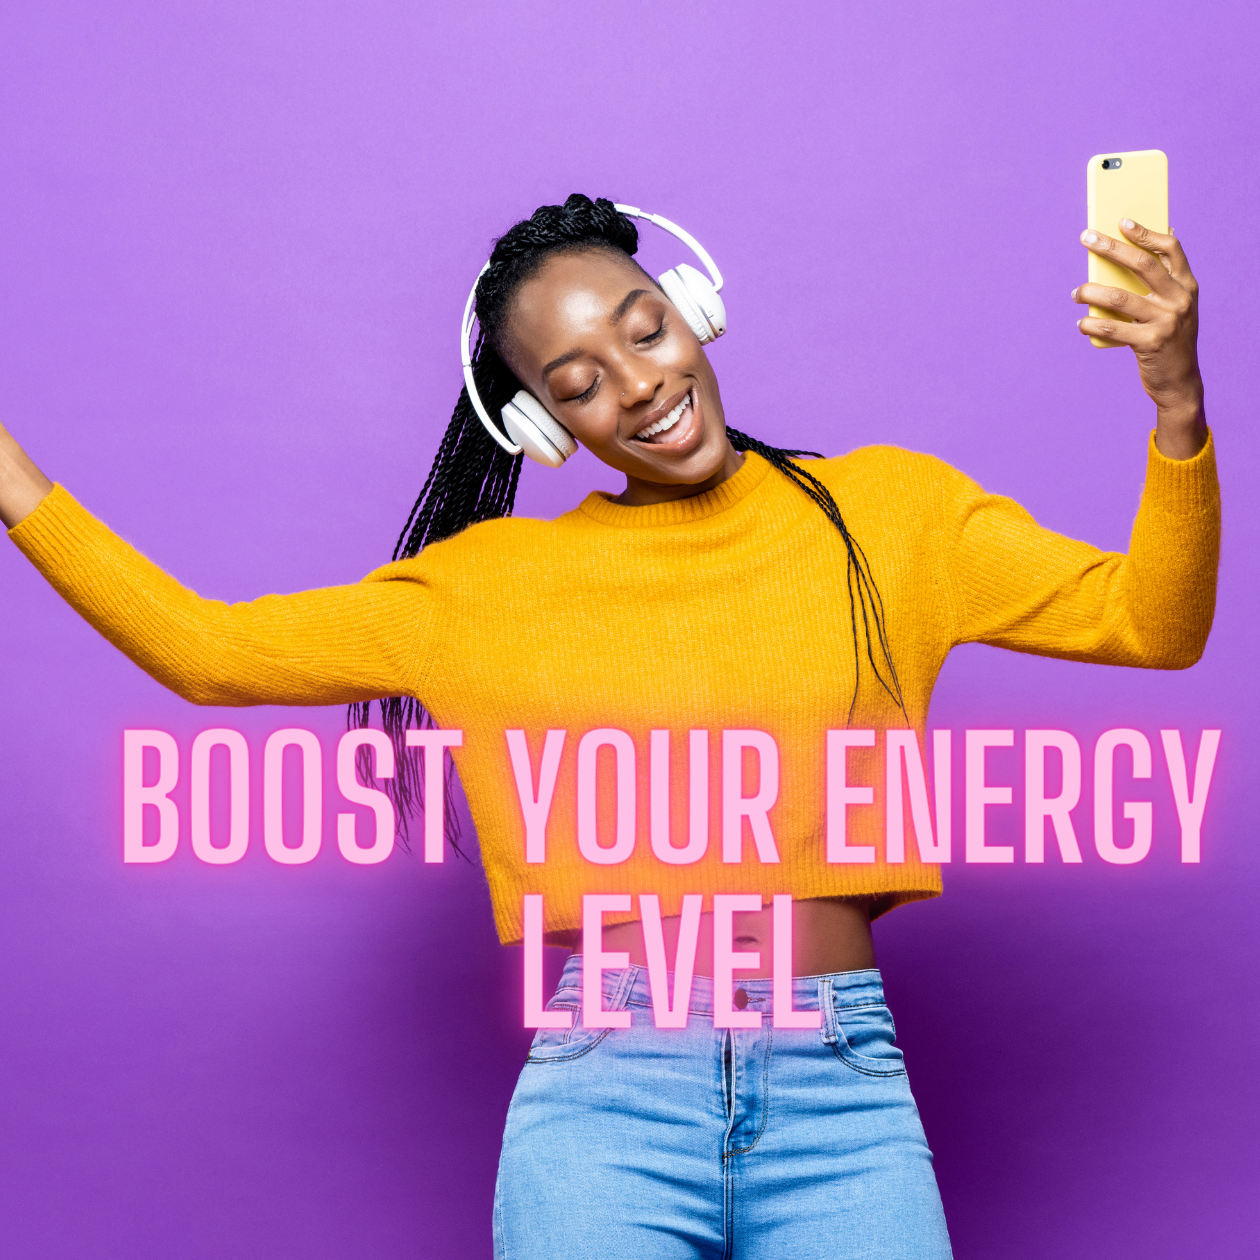 how to boost your energy level by listening to music and dancing. Self love and self care